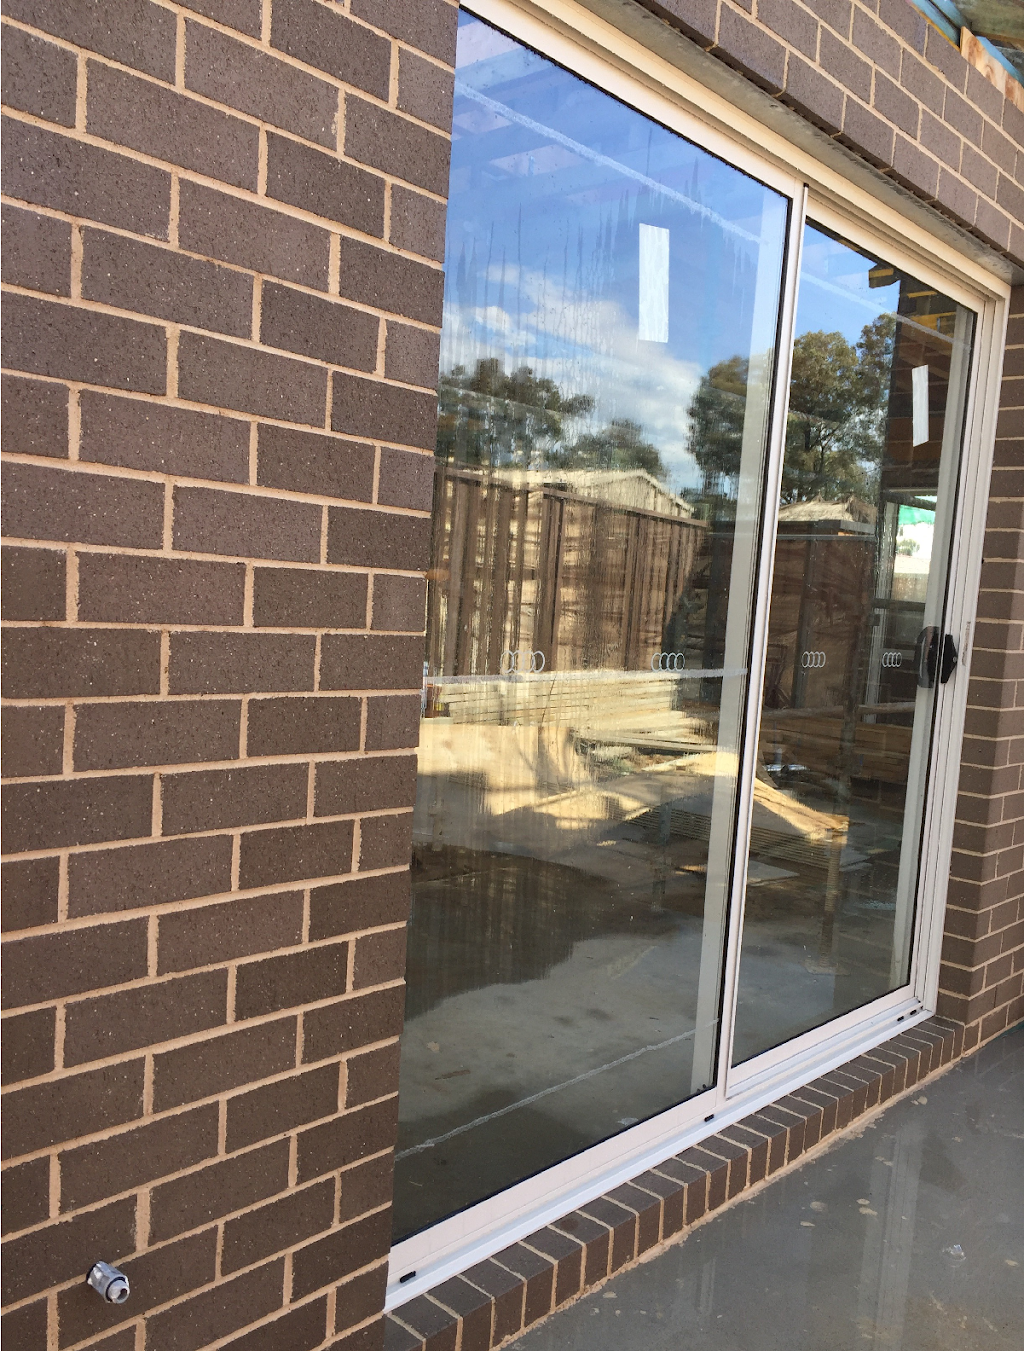 NYNA BRICK PRESSURE CLEANING – Window, High Pressure Cleaning |  | Servicing Blacktown, Penrith, Hills District, Rooty Hill, Prospect, Bella Vista, St Marys, Kings Langley, Quakers Hill, The Ponds, Jordan Springs, Glenmore Park, Ropes Crossing, 64 Morehead Ave, Mount Druitt NSW 2770, Australia | Phone: 0421 007 465